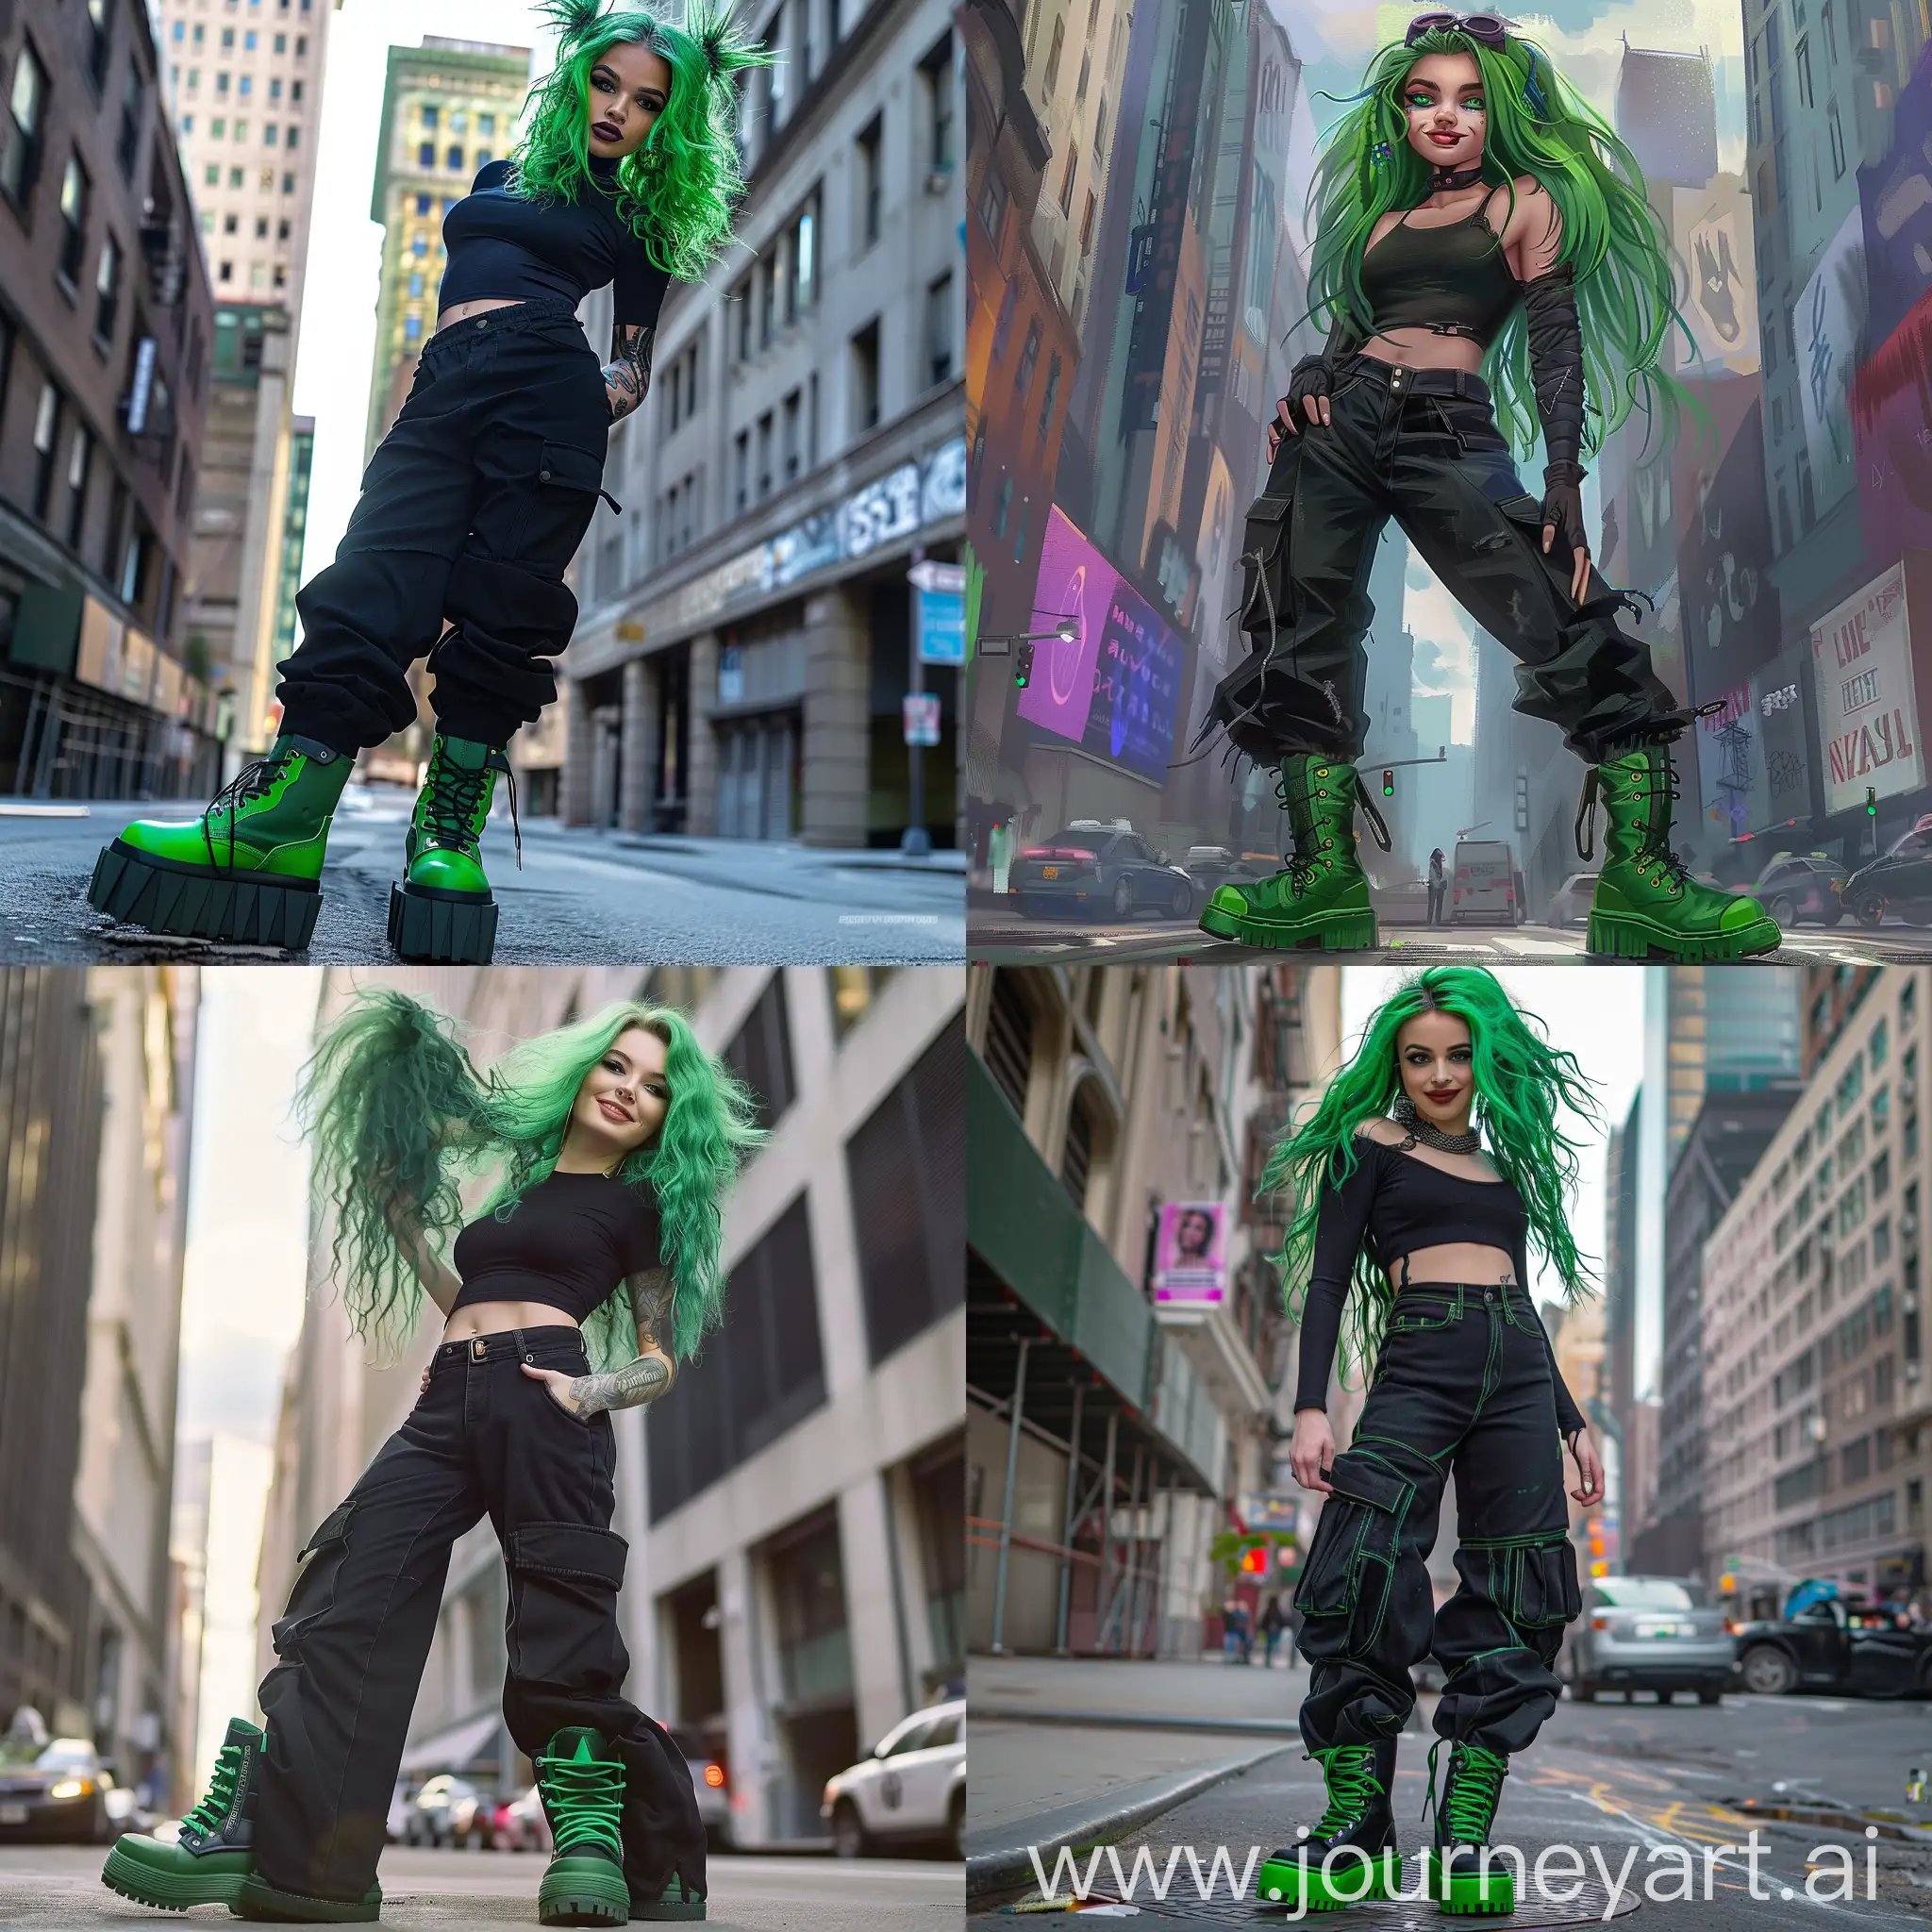 Woman, green tousled messy hair, emerald green eyes, long eyelashes, cocky smirk, wearing a black top and black baggy pants with combat boots with green soles, standing in the city streets